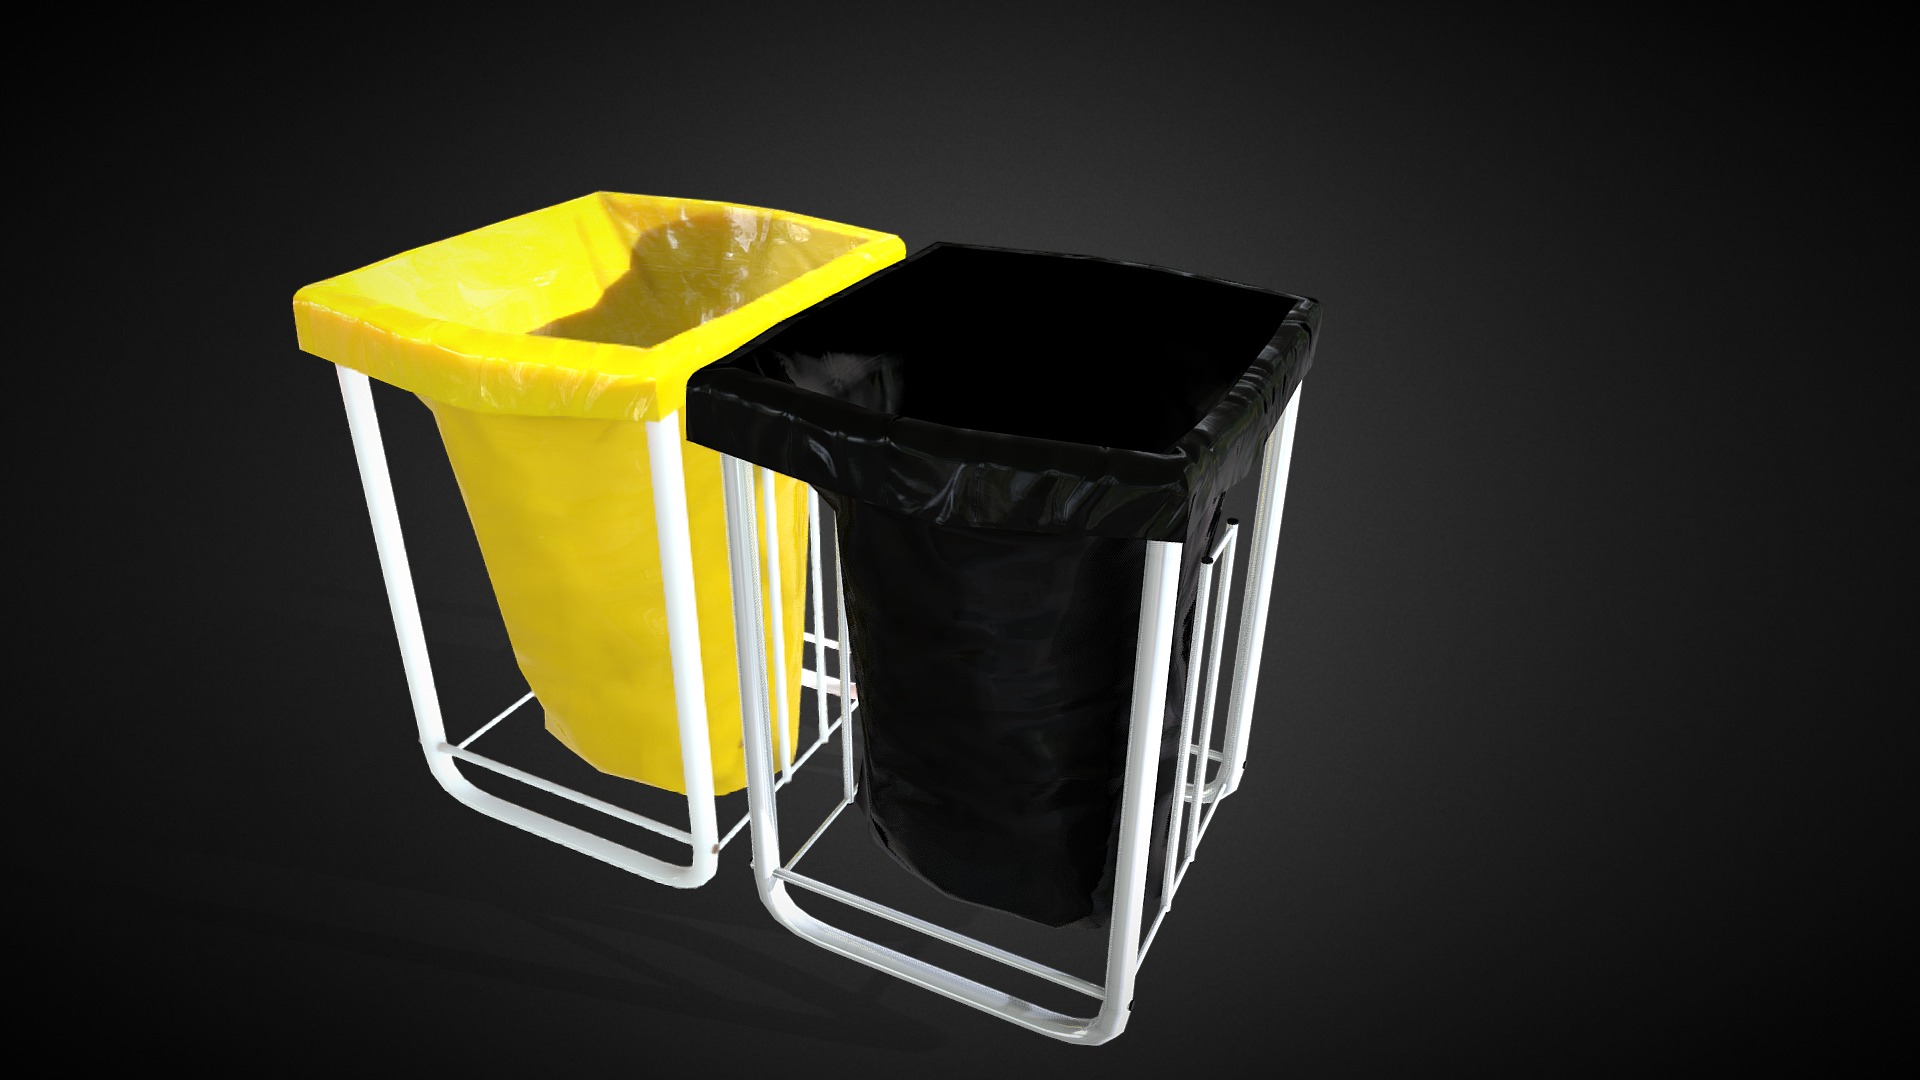 3D model Trash - This is a 3D model of the Trash. The 3D model is about a black and yellow cube.